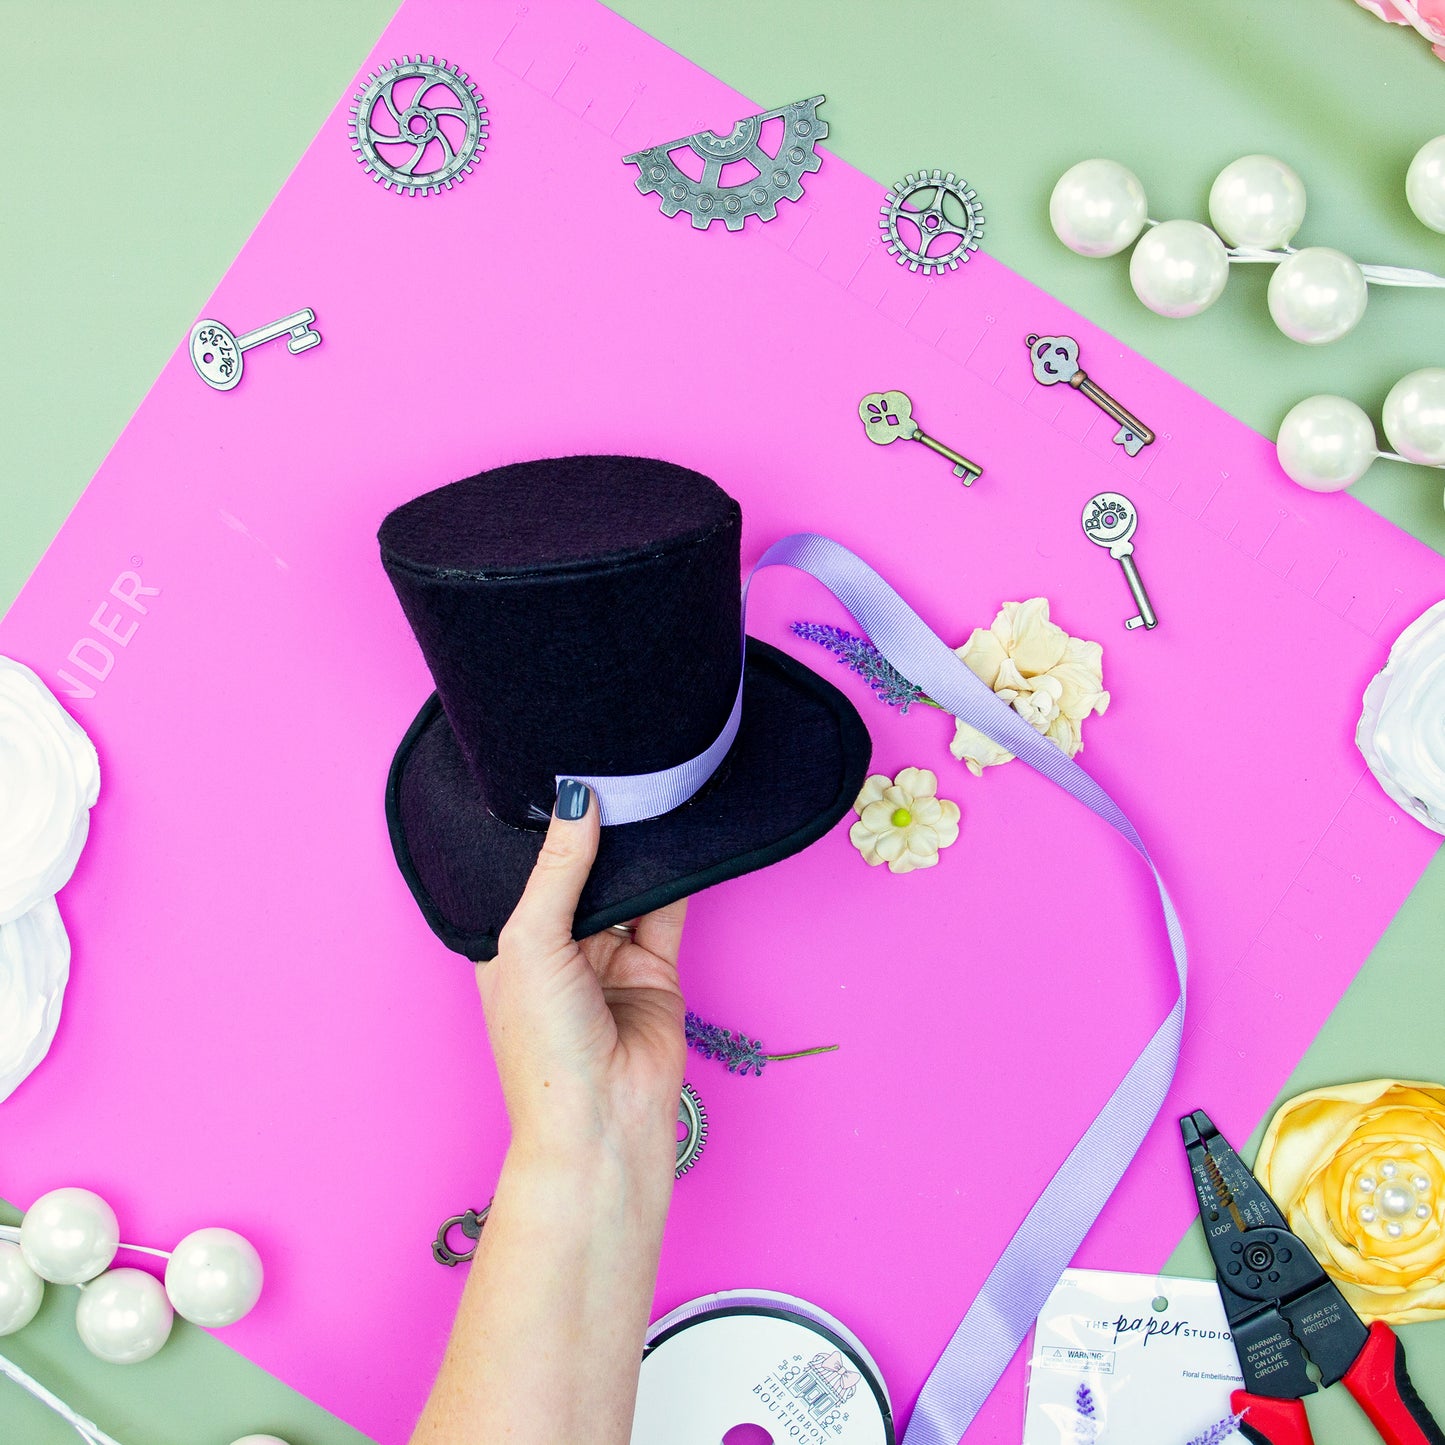 Mini Top Hat Pattern and SVG Files